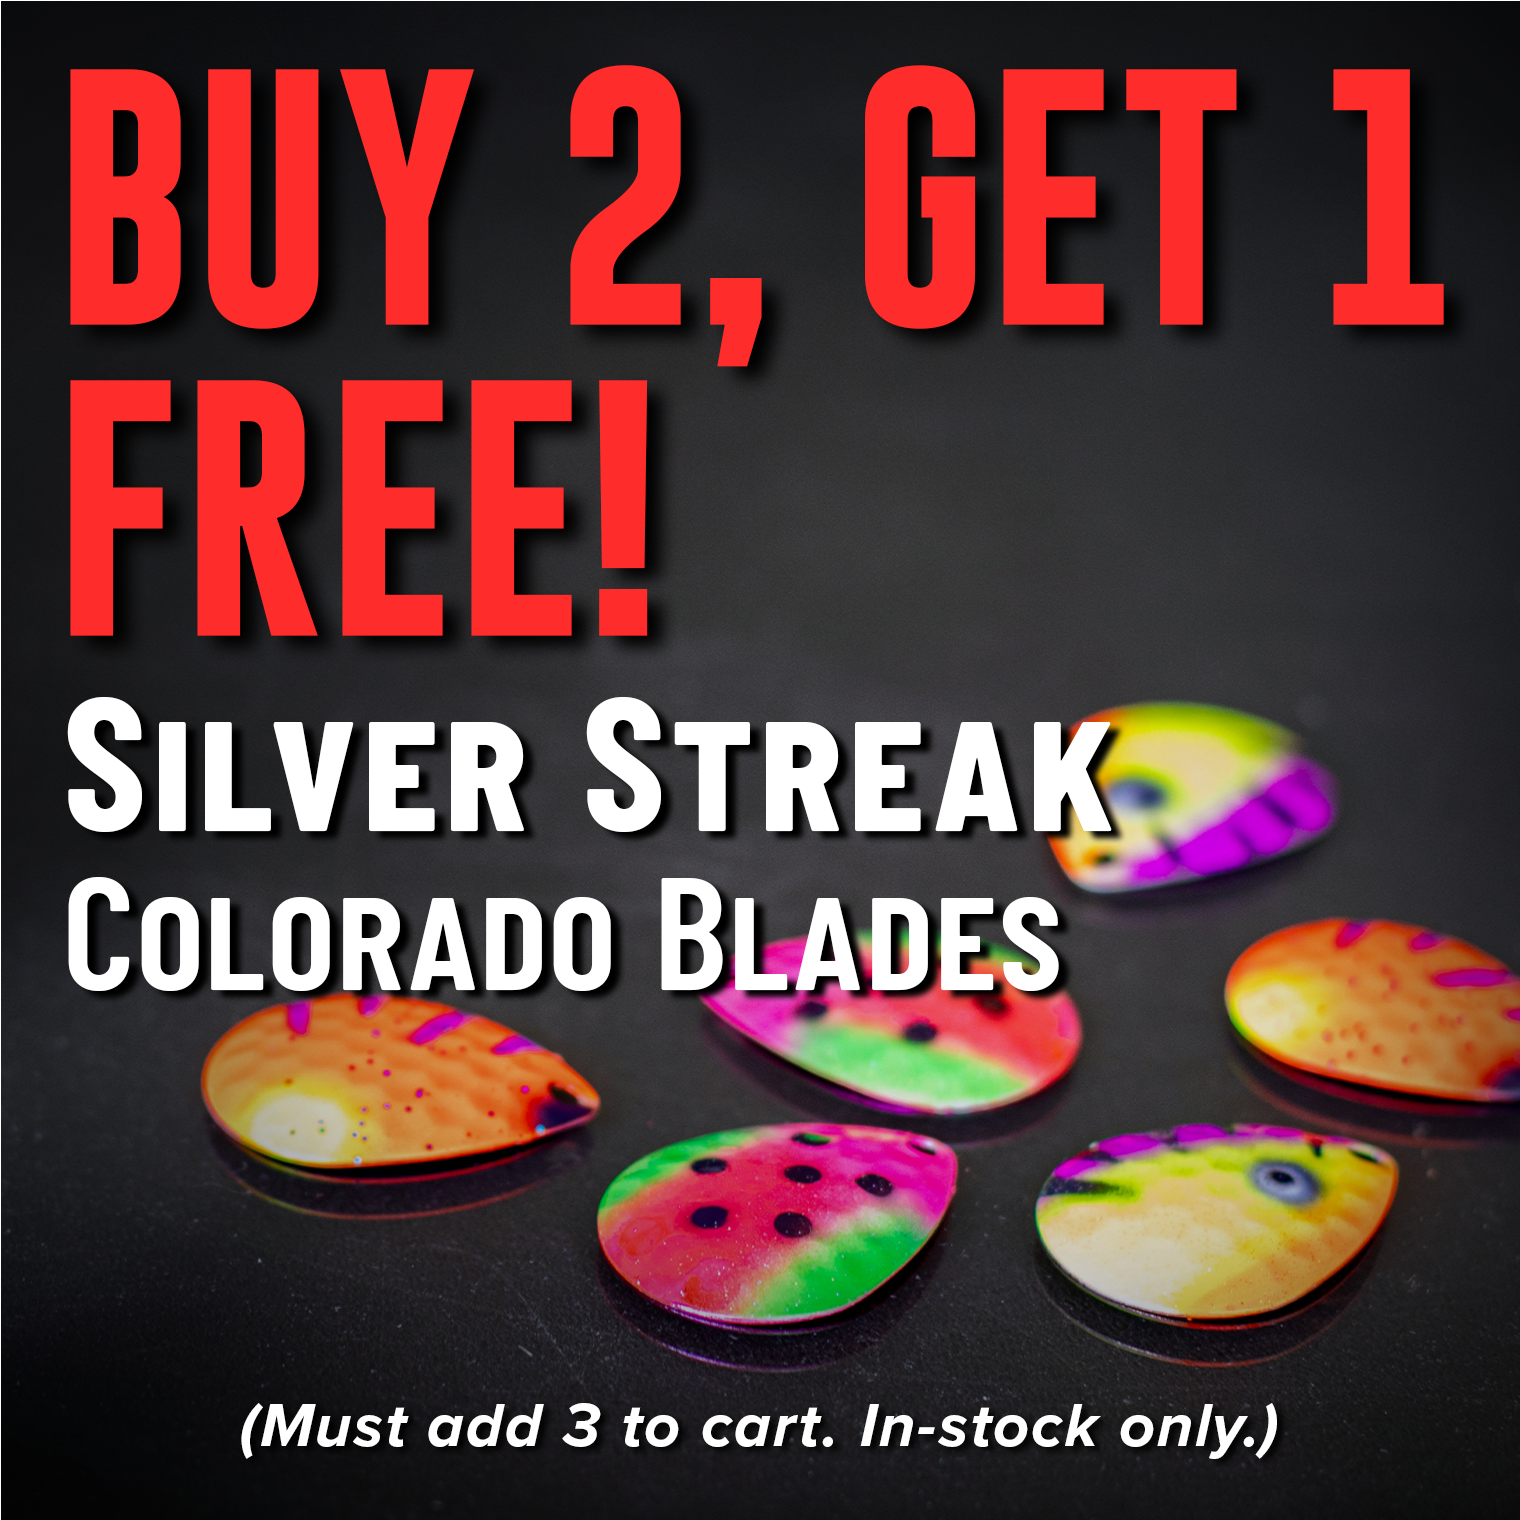 Buy 2, Get 1 Free! Silver Streak Colorado Blades (Must add 3 to cart. In-stock only.)